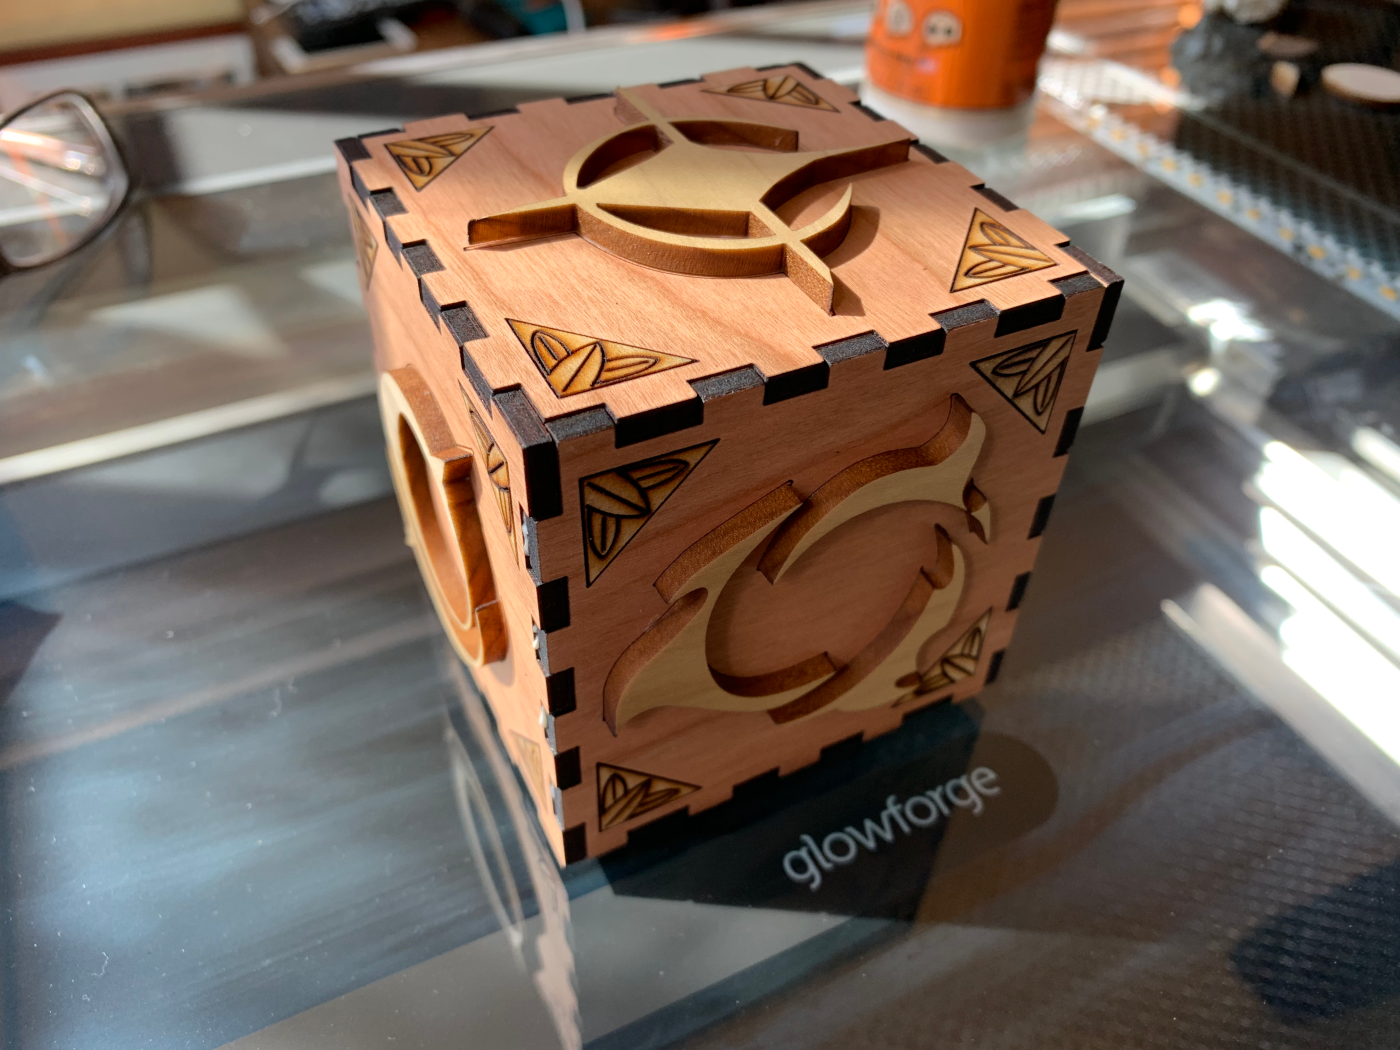 What Are Glowforge Proofgrade Materials?